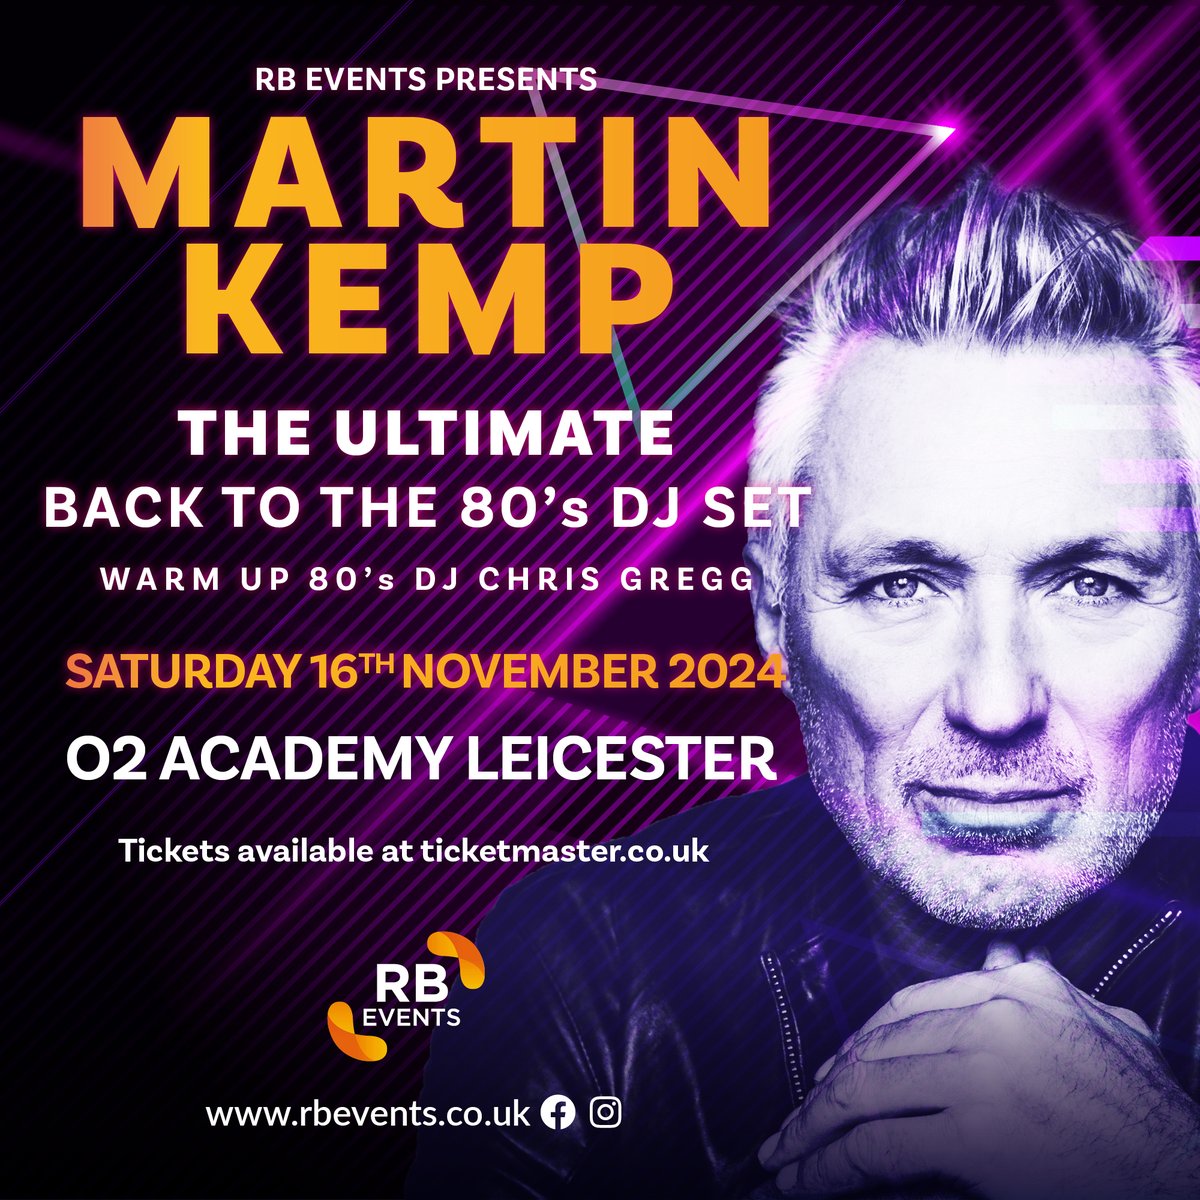 .@realmartinkemp returns for his annual ‘Back To The 80s showdown. Join Martin as he trades his bass for the decks and spins the biggest and best hits from the 1980s - Saturday 16 November. Tickets - amg-venues.com/b4l650RiUw7